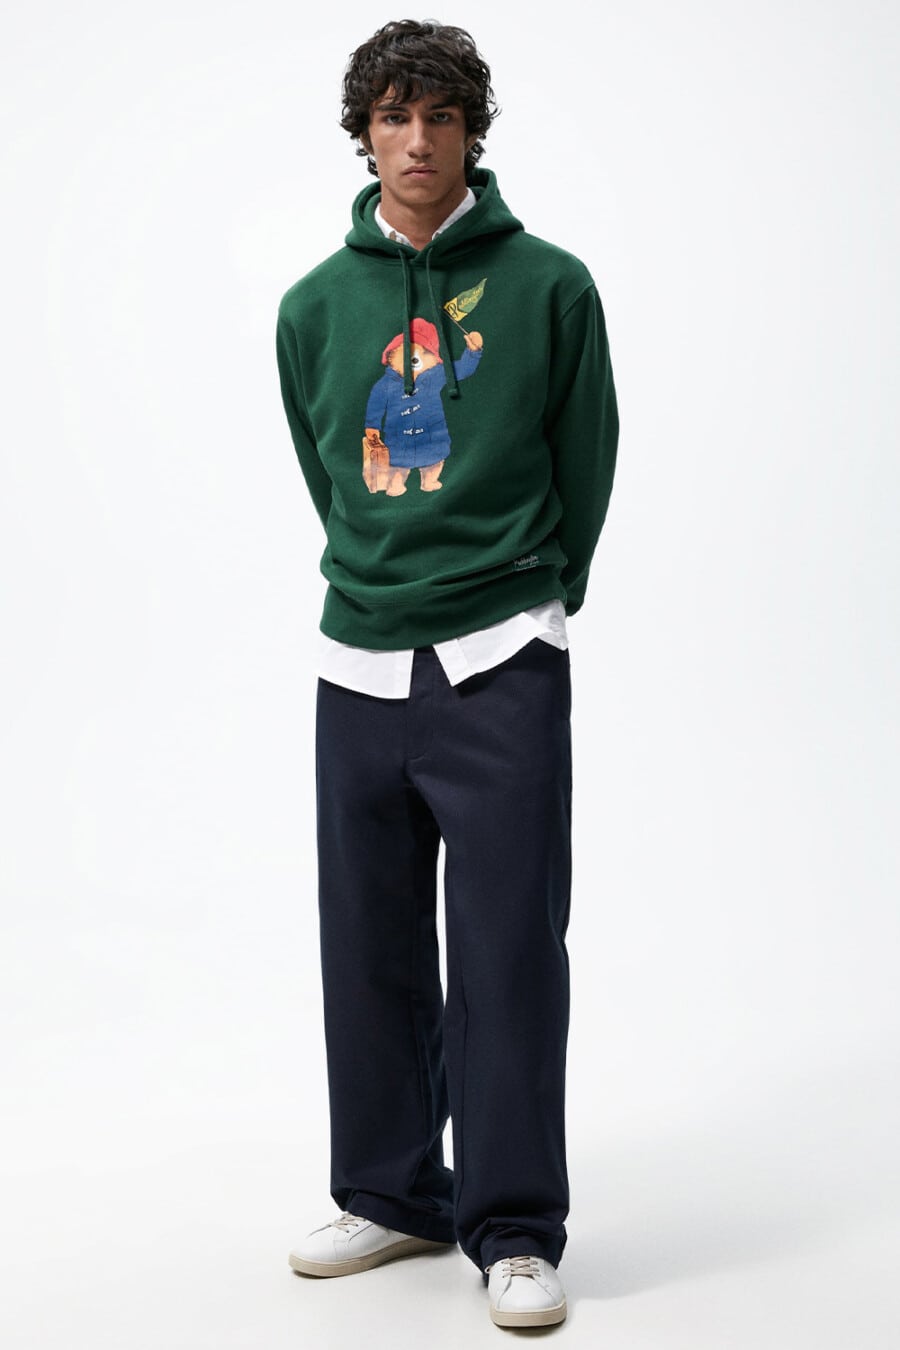 Men's wide-leg baggy navy pants, white Oxford shirt, green printed berar hoodie and white sneakers outfit